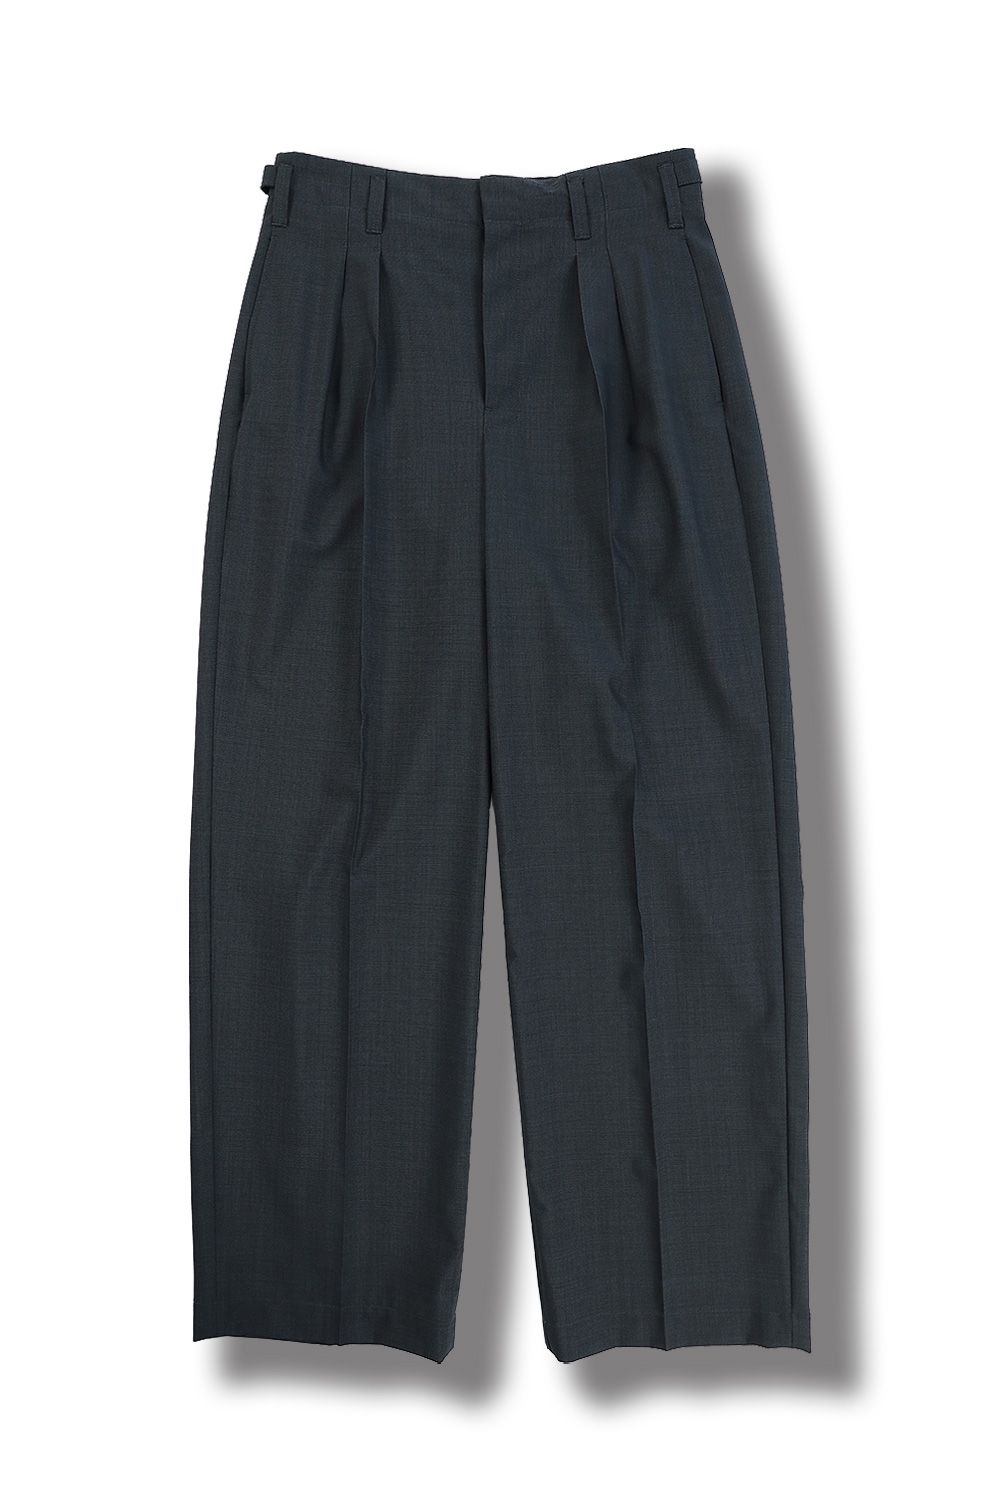 LEMAIRE - 2 PLEATS PANTS(ANTHRACITE/GREY) | Acacia ...